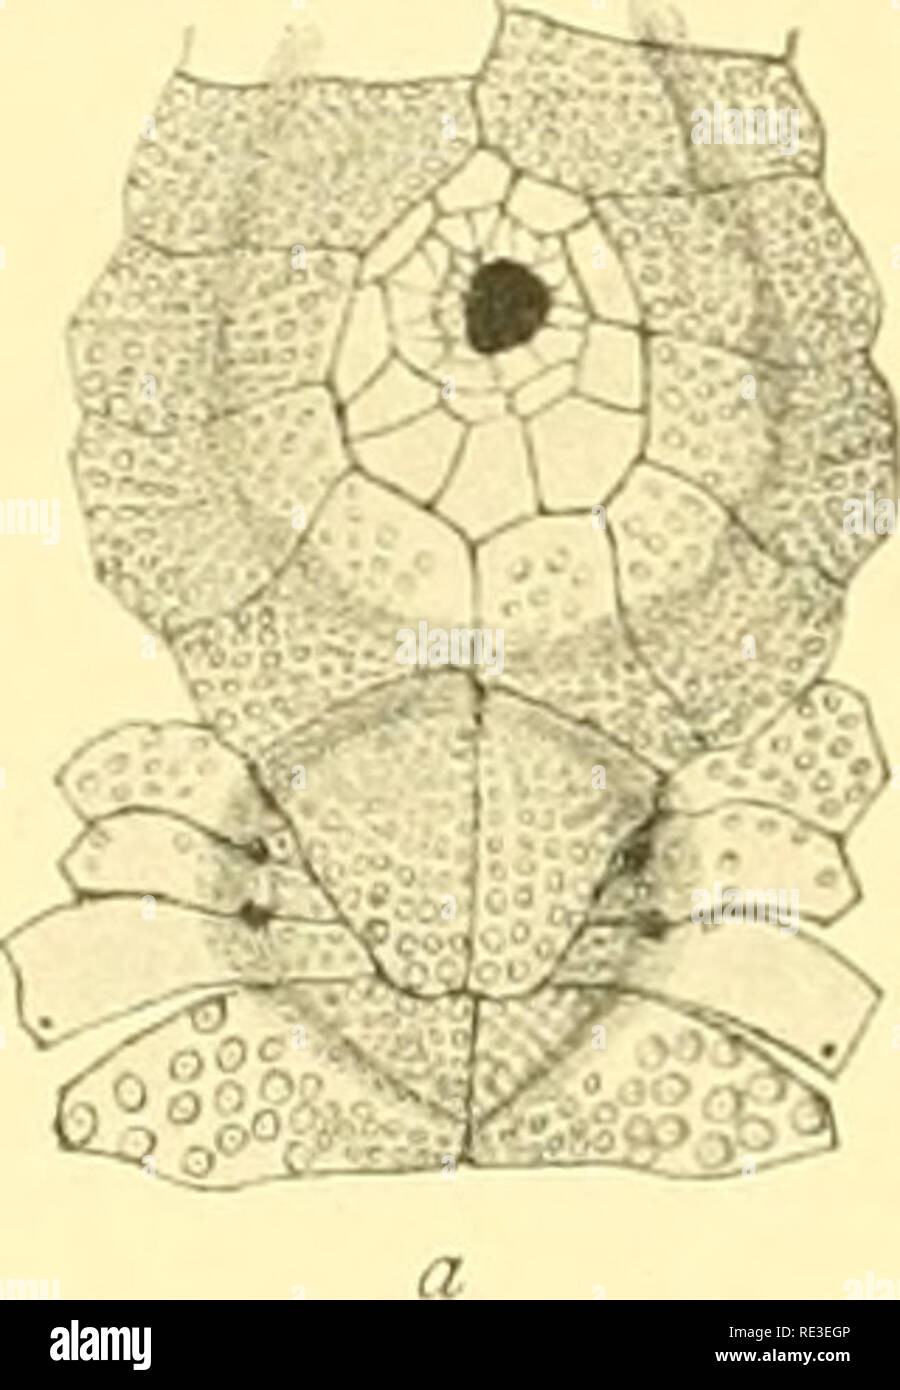 . Echinoidea. Sea urchins. 146 ECHINOIDEA. II. Agassiz (Rev. of Ech. PI. XXV. 27—28). Globiferoiis, rostrate, tridentate and triphyllous pedicellariæ have been found; ophicephalous ones do not seem to occur. The globiferoiis pedicellariæ (PI. XVII. Figs. 37, 49) are very conspicuoiis, with a thick. brownish head; the val ves are very short, with a very large basal part and a short, tubeshaped blade, whicli has 5—6 teeth along each side of the elongate terminal opening and often an onter median one. The stalk has a whorl of free projecting rods at its lower end; the npper end is attenuated. The Stock Photo